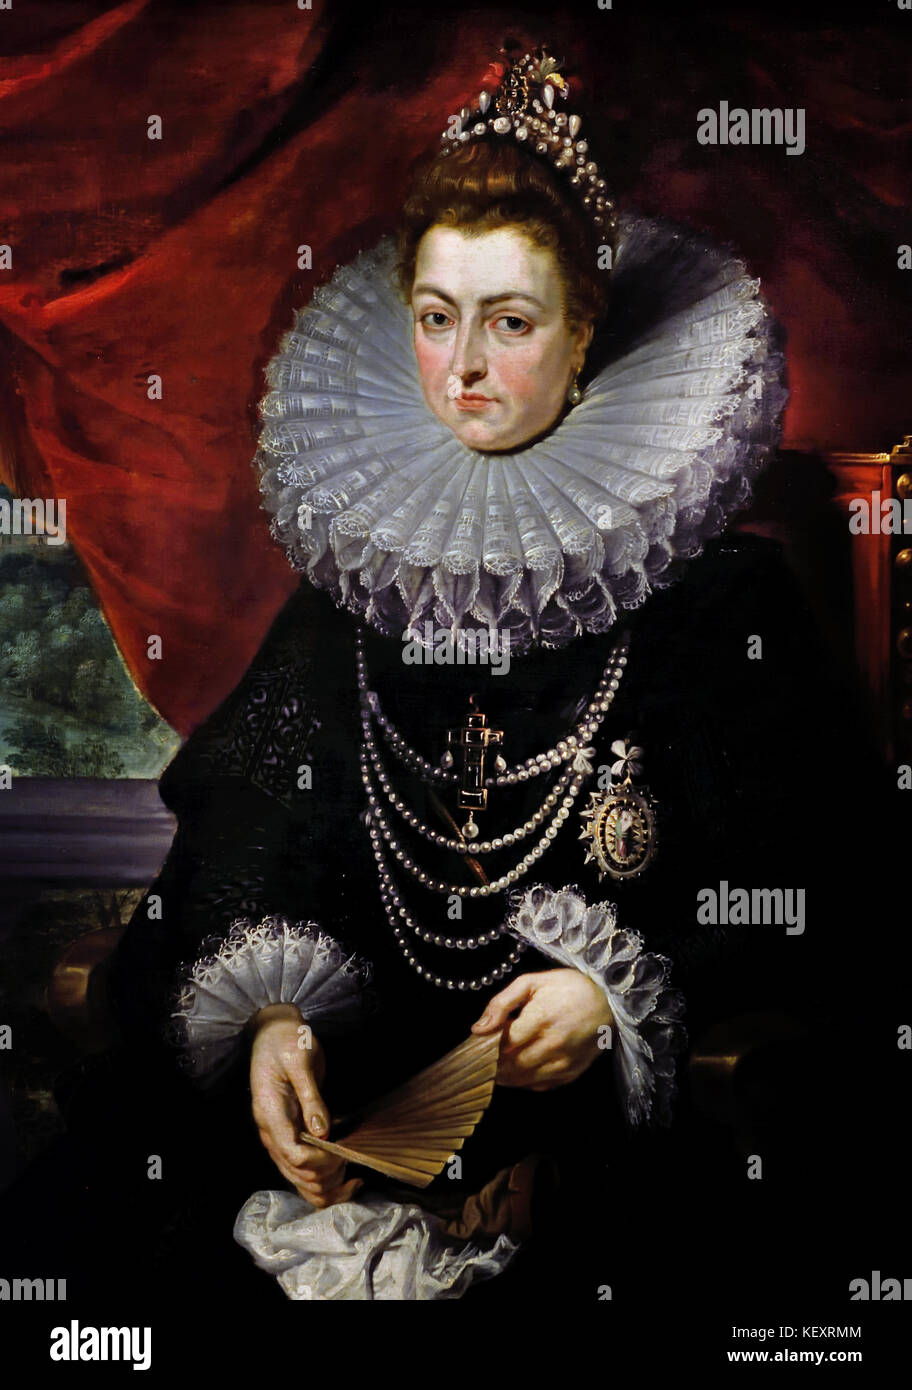 Isabella Clara Eugenia 1566 – 1633 sovereign of the Spanish Netherlands and the north of modern France, Husband Albert VII, Archduke of Austria. ( Clara Isabella Eugenia was an infanta of Spain and Portugal ) Peter Paul Rubens (1577–1640) Painter in the Flemish Baroque tradition .Antwerp, Antwerpen, Belgium, Stock Photo